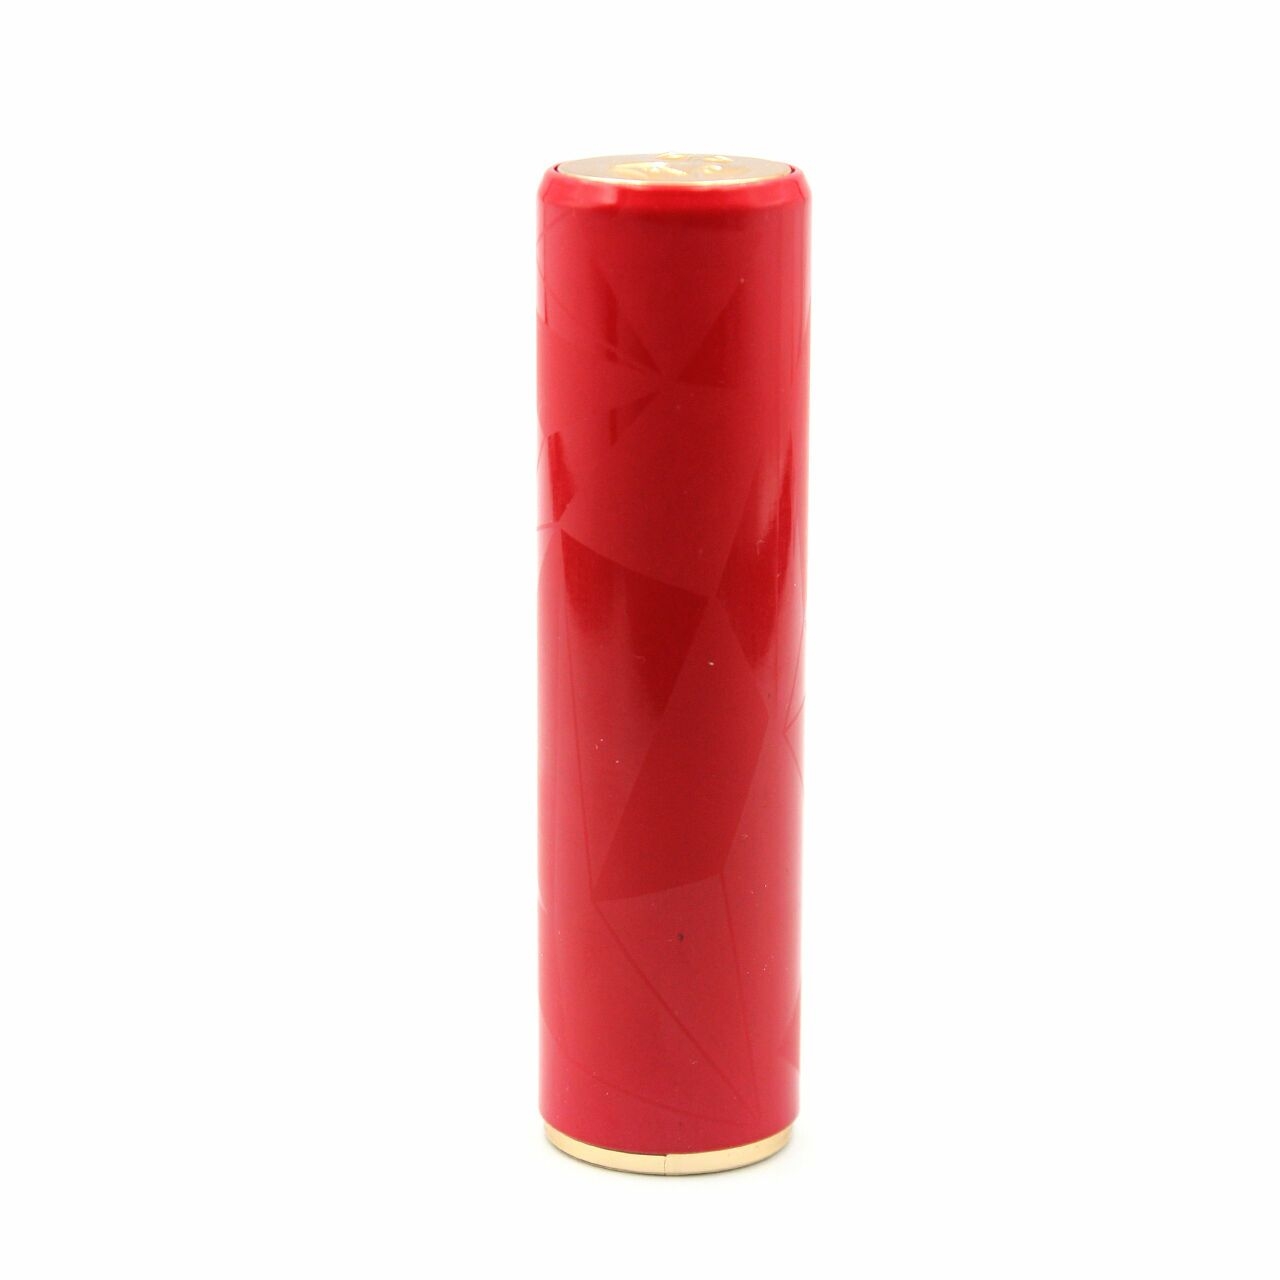 Lancome L’Absolu Rouge Ruby Shade 01 Bad Lips